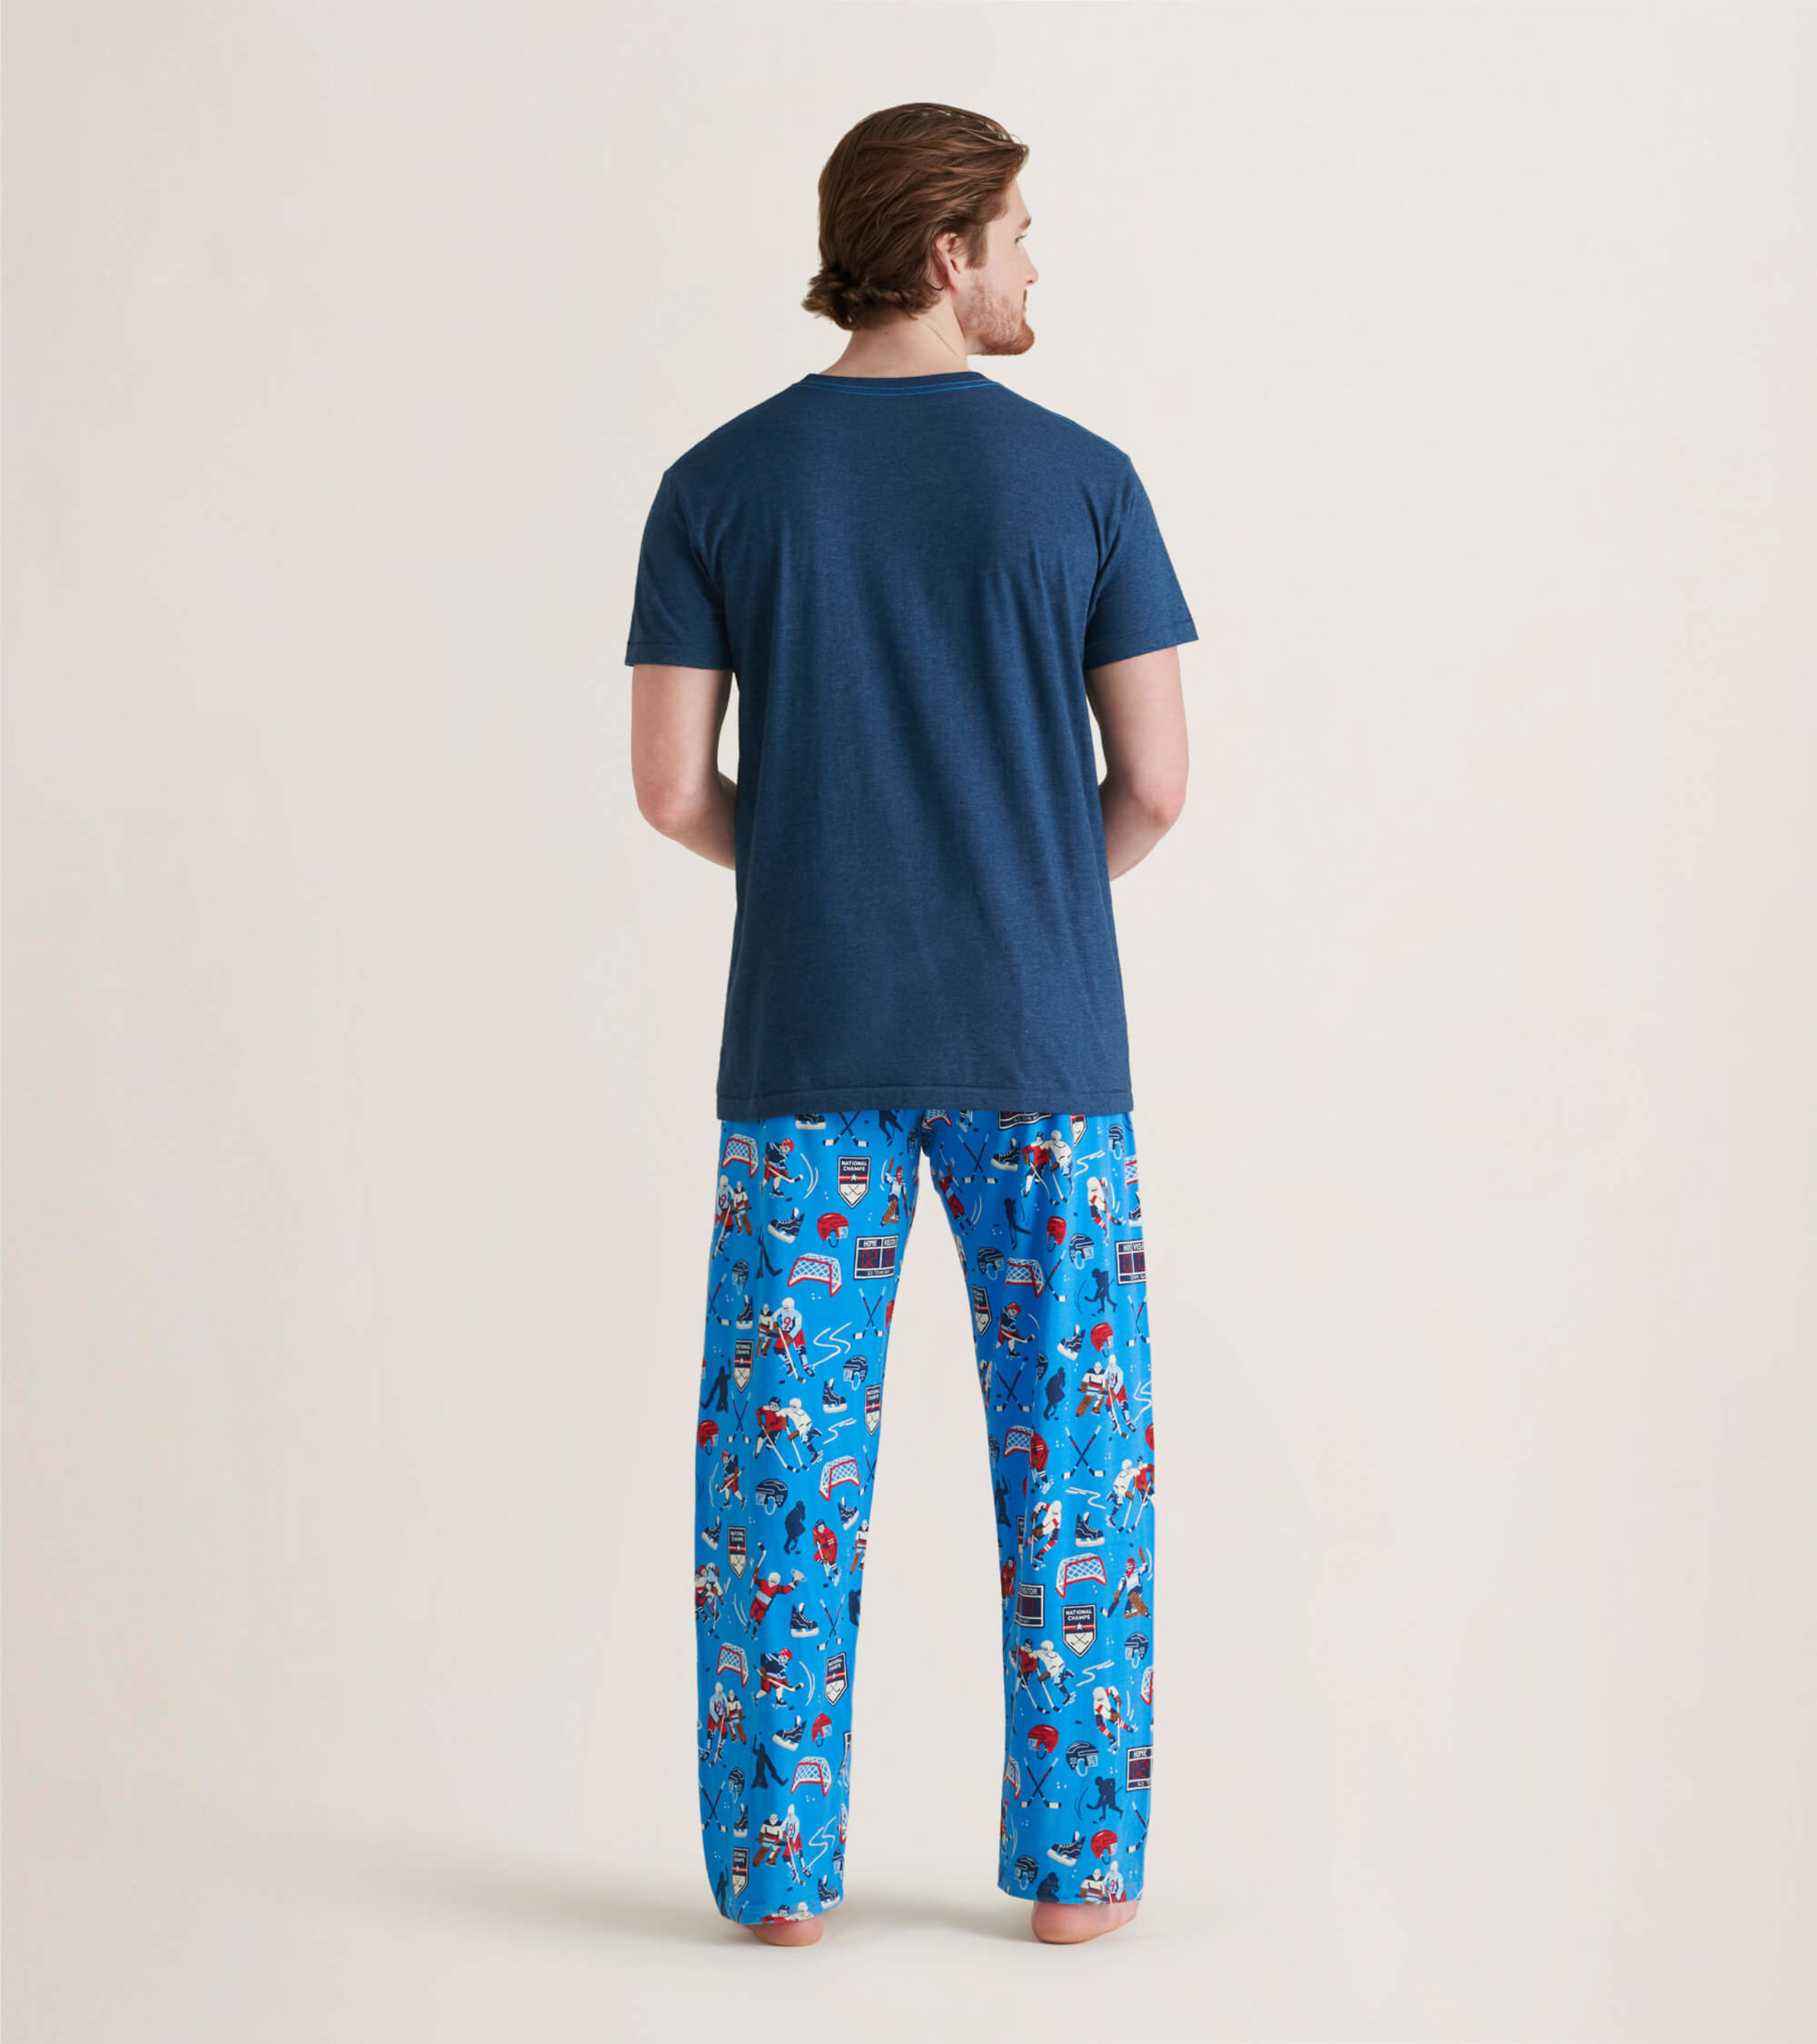 Little Blue House Men's Wild About Skiing Jersey Pajama Pants